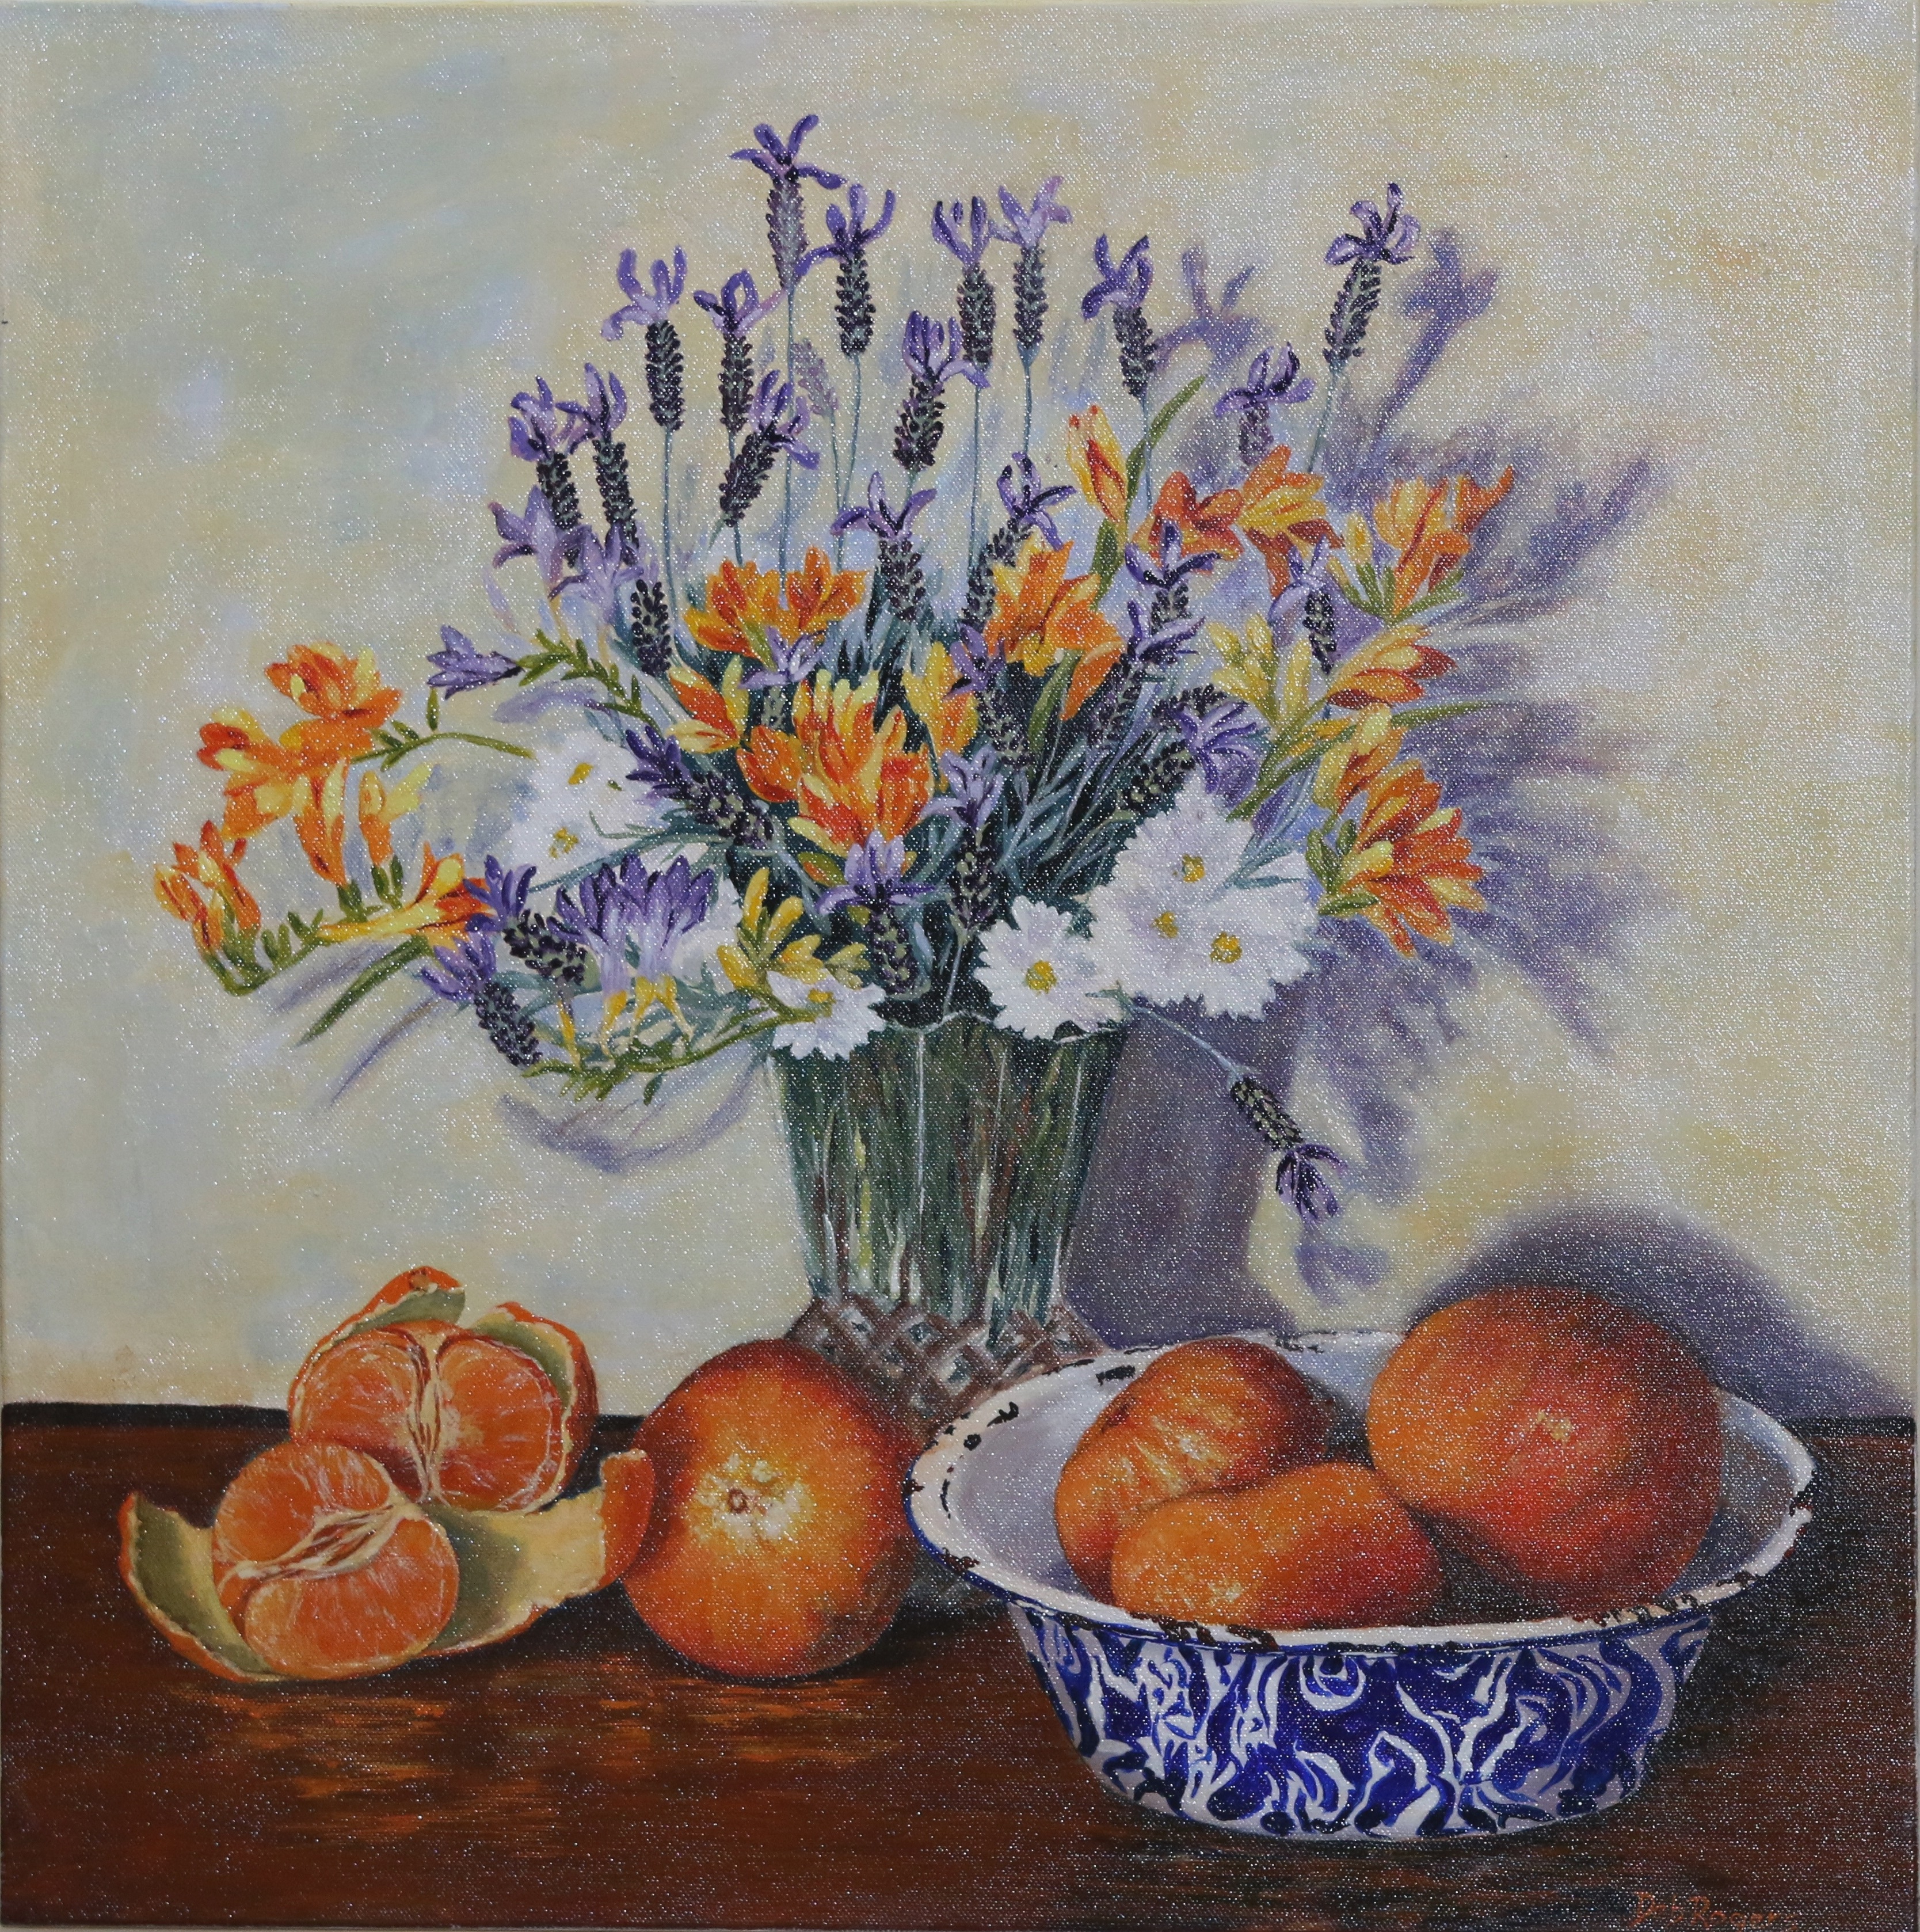 Freesias with Lavendar by Deb Rogers